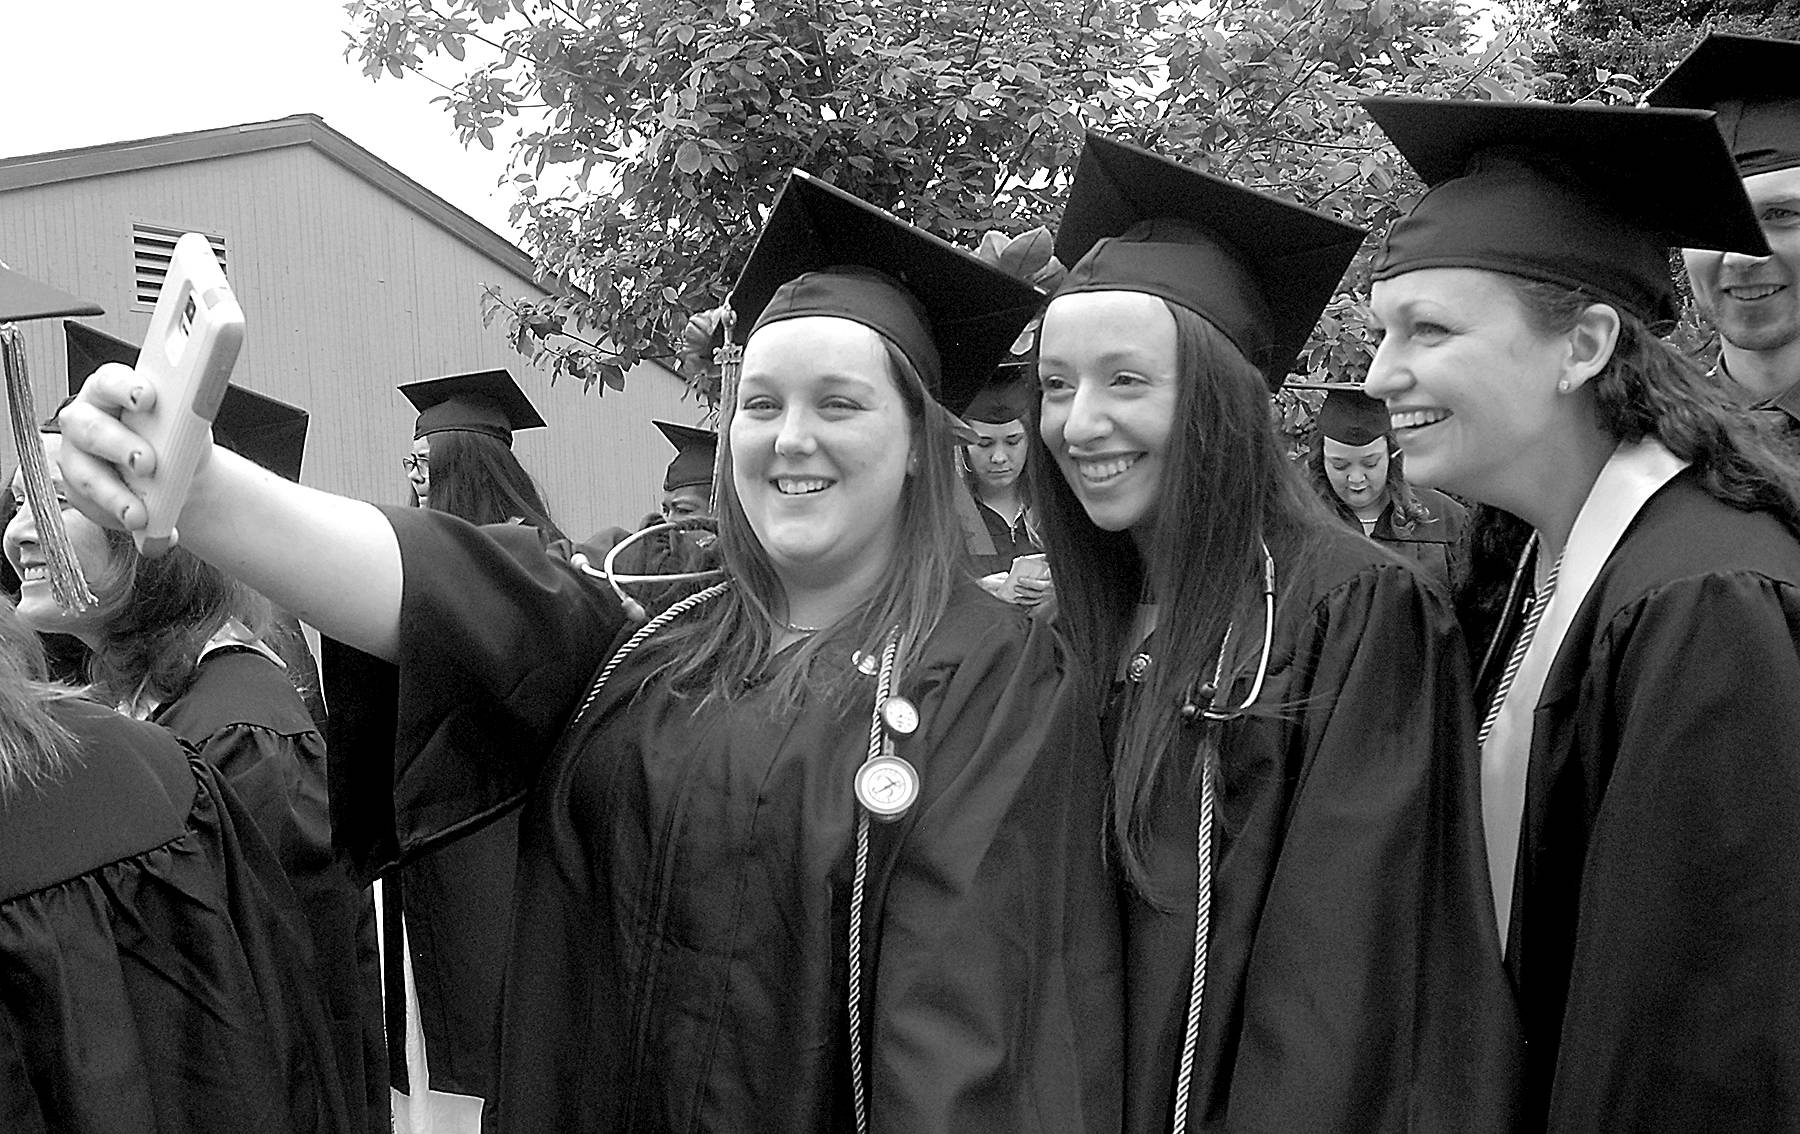 Nursing students, from left, Carrie Bertman of Port Angeles, Michelle Abell-Sietz of Sequim and Jessica Meek of Port Angeles pose for a group selfie while lining up for commencement ceremonies on Saturday on the Port Angeles campus of Peninsula College. A total of 275 students were set to take part in the proceedings out of 486 students receiving 600 degrees and certificates.